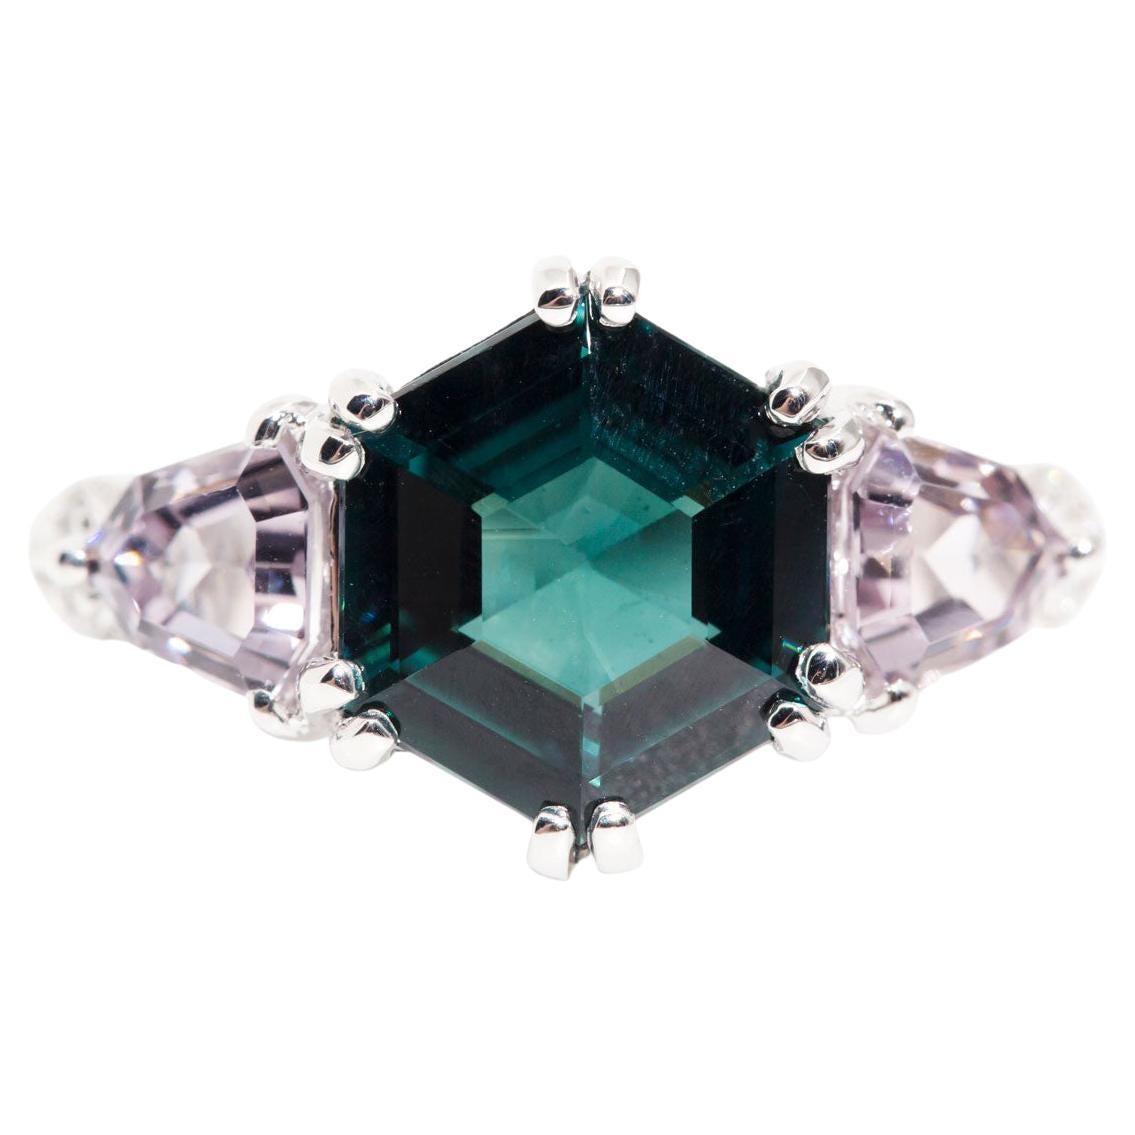 2.46 Carat Hexagon Teal Tourmaline and Spinel 18 Carat White Gold Cluster Ring